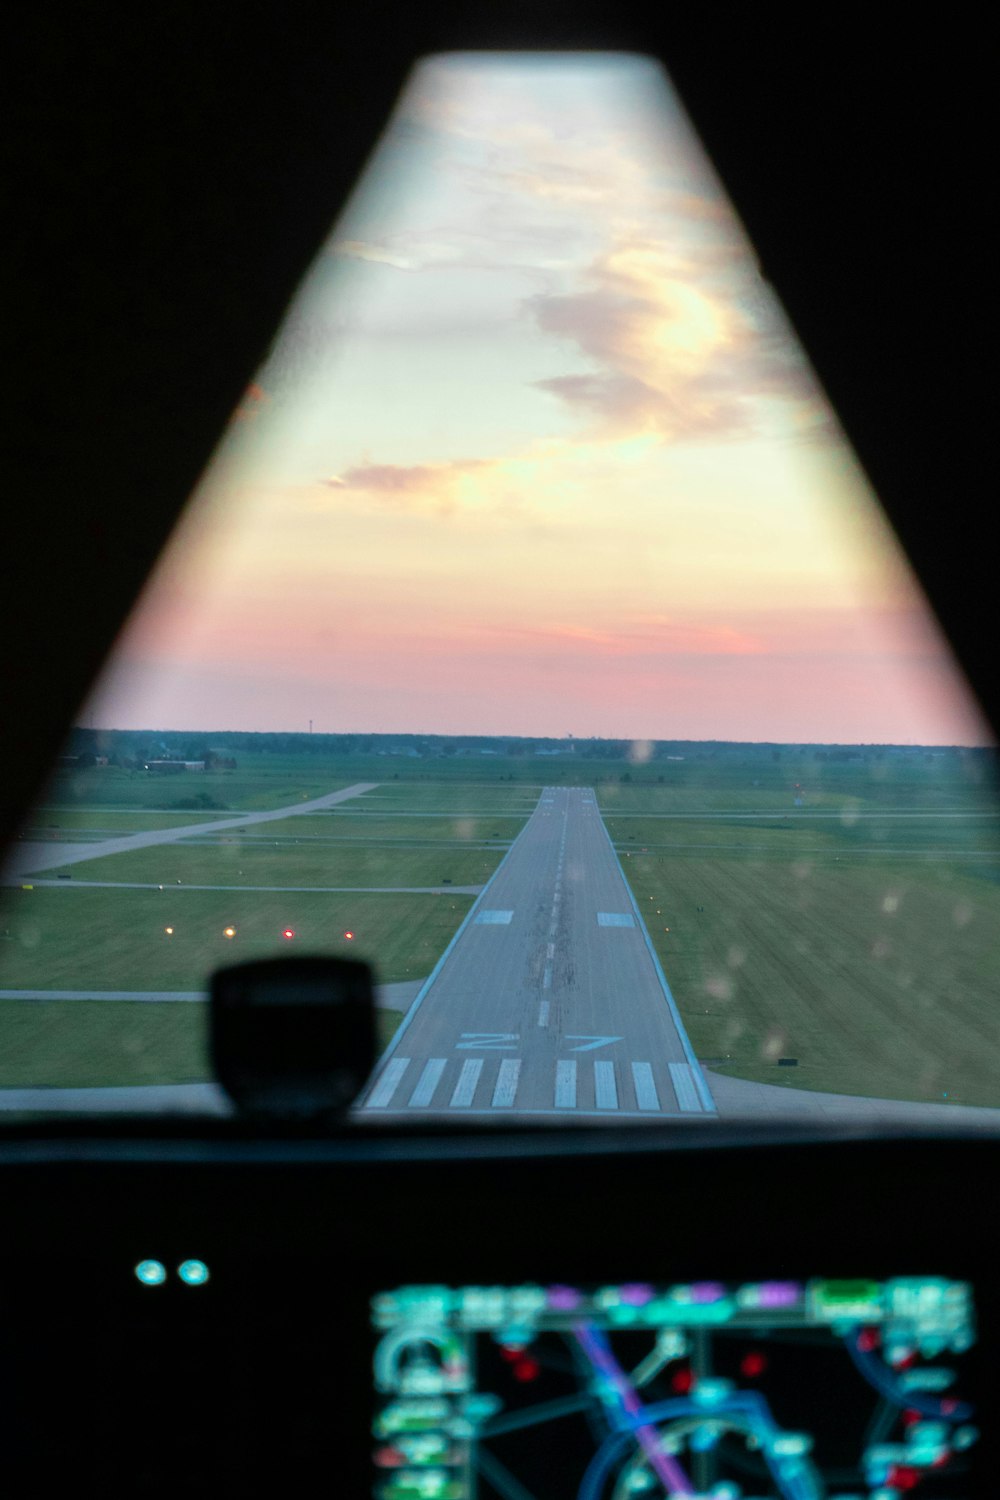 a view of a runway from inside a plane